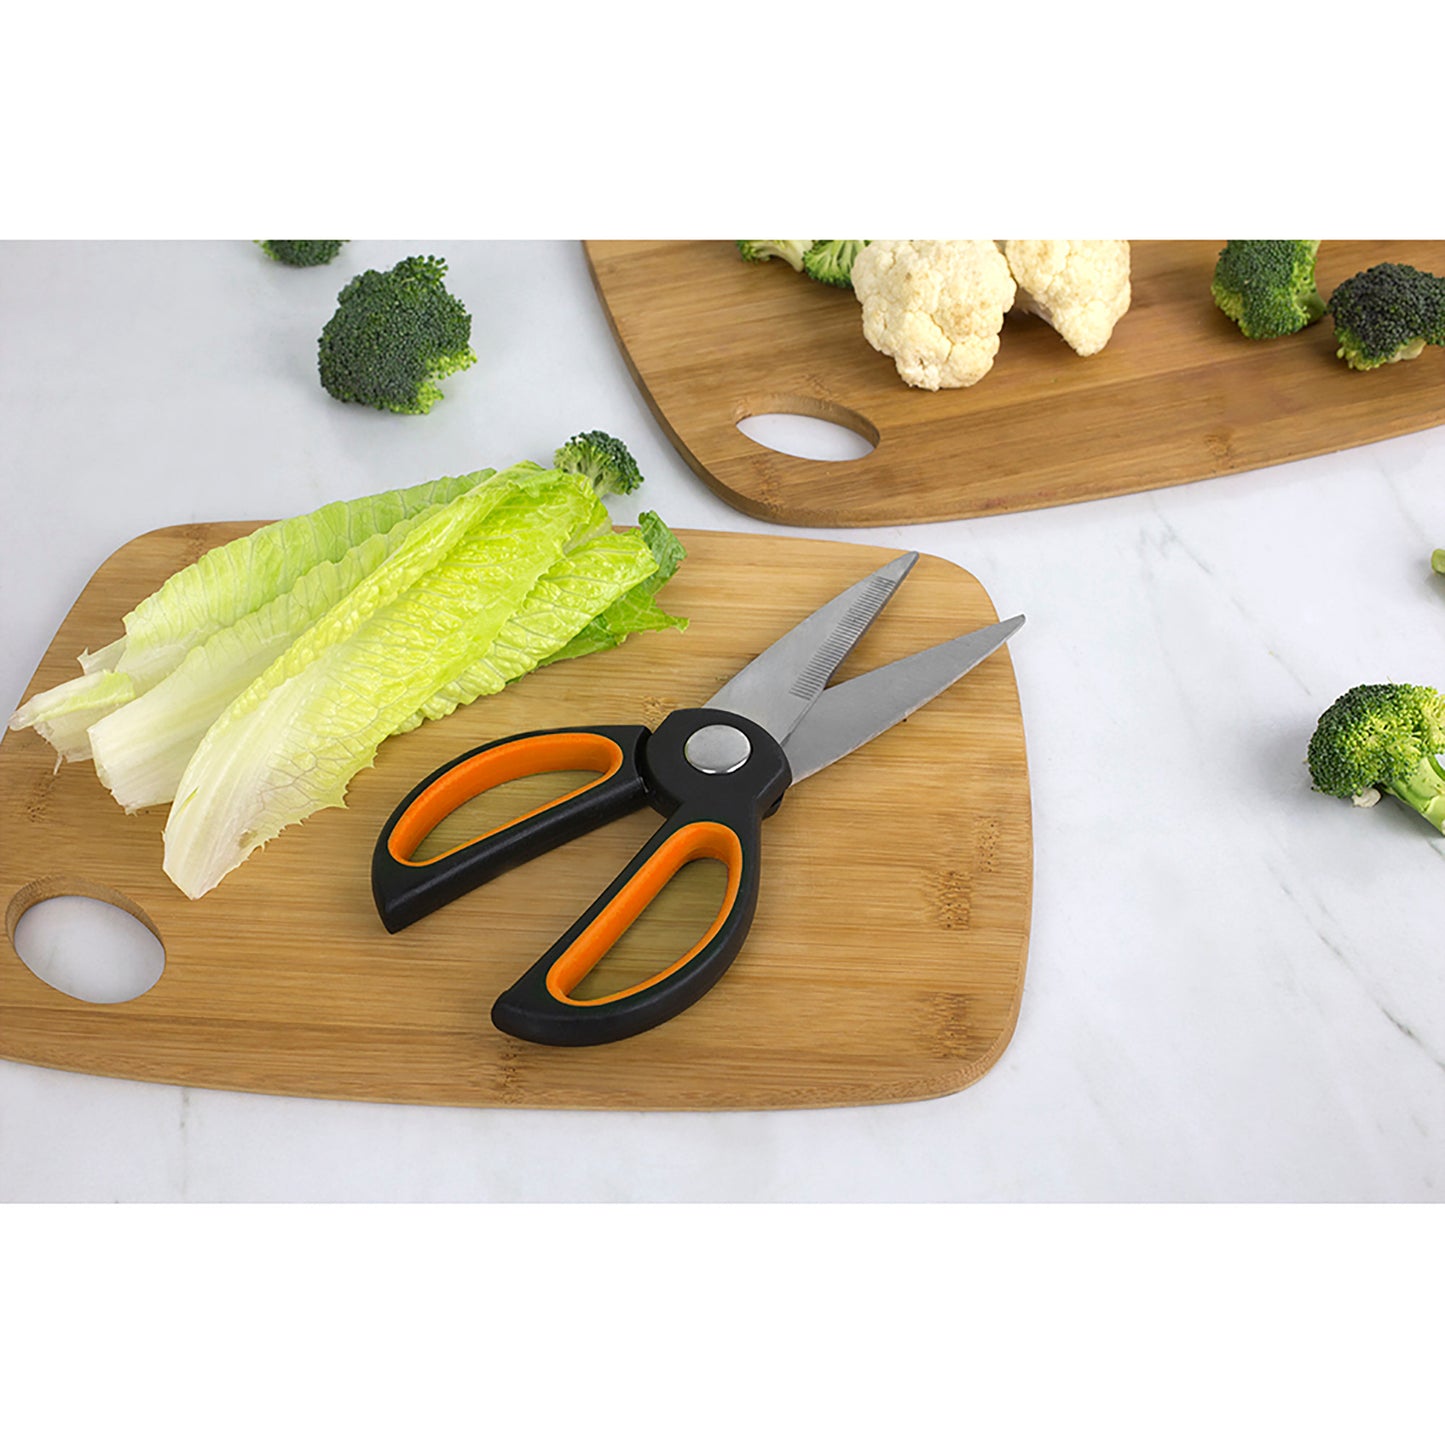 Home Basics Kitchen Shears with Silicone Grip Handles - Orange